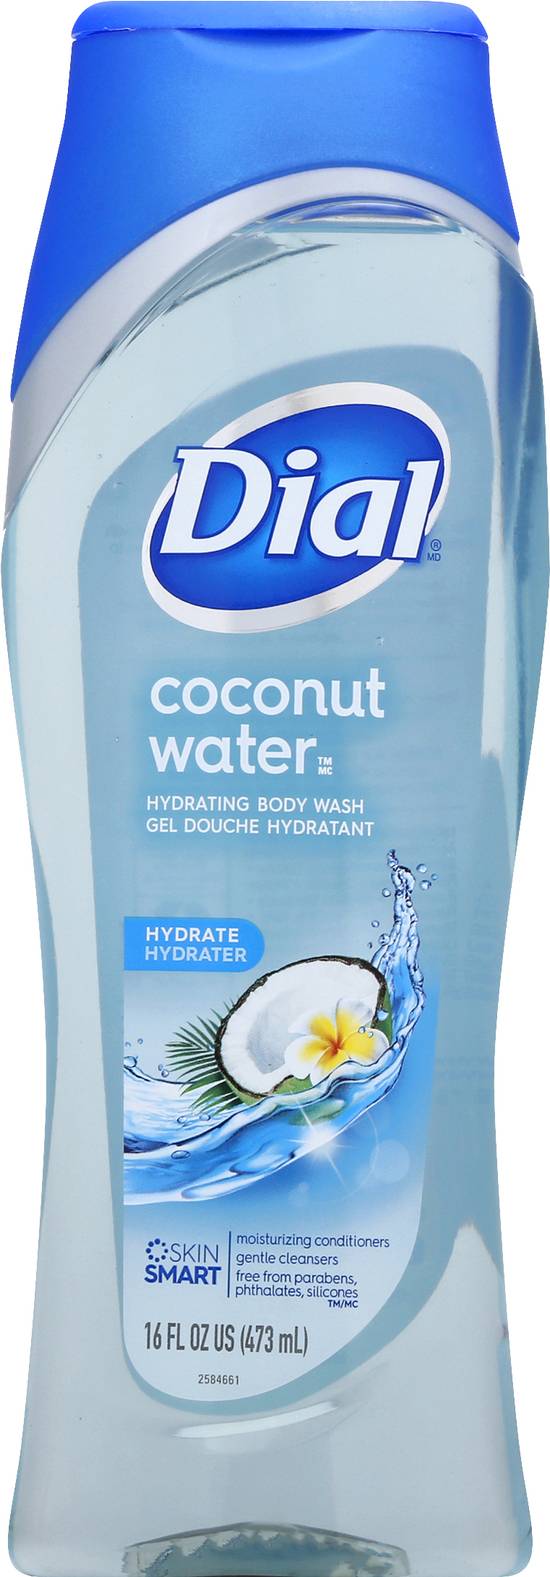 Dial Hydrating Coconut Water Body Wash